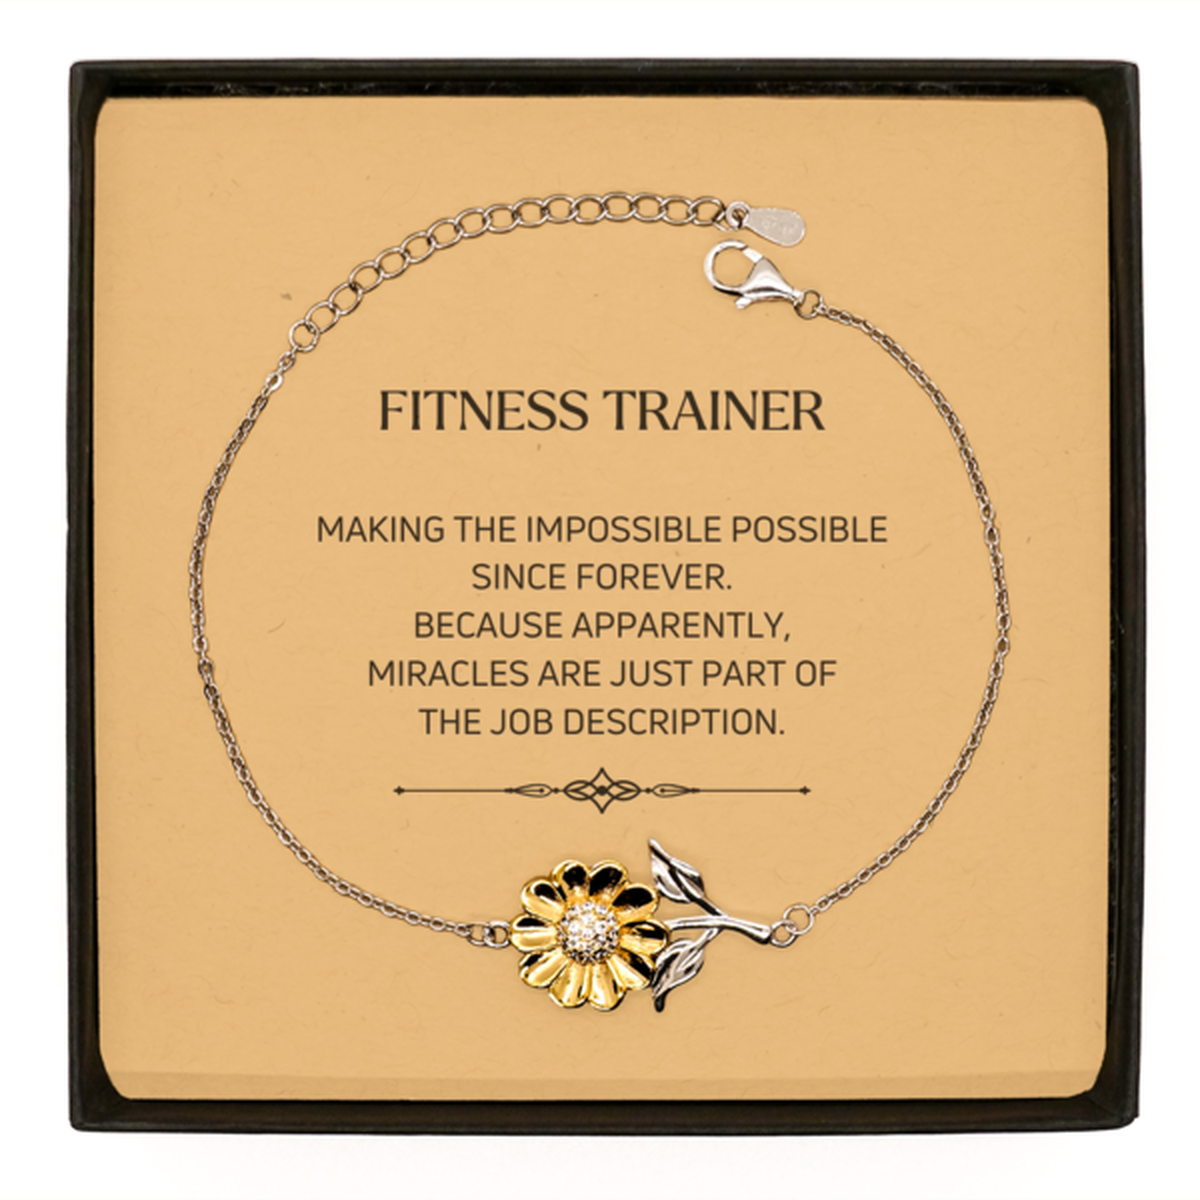 Funny Fitness Trainer Gifts, Miracles are just part of the job description, Inspirational Birthday Sunflower Bracelet For Fitness Trainer, Men, Women, Coworkers, Friends, Boss